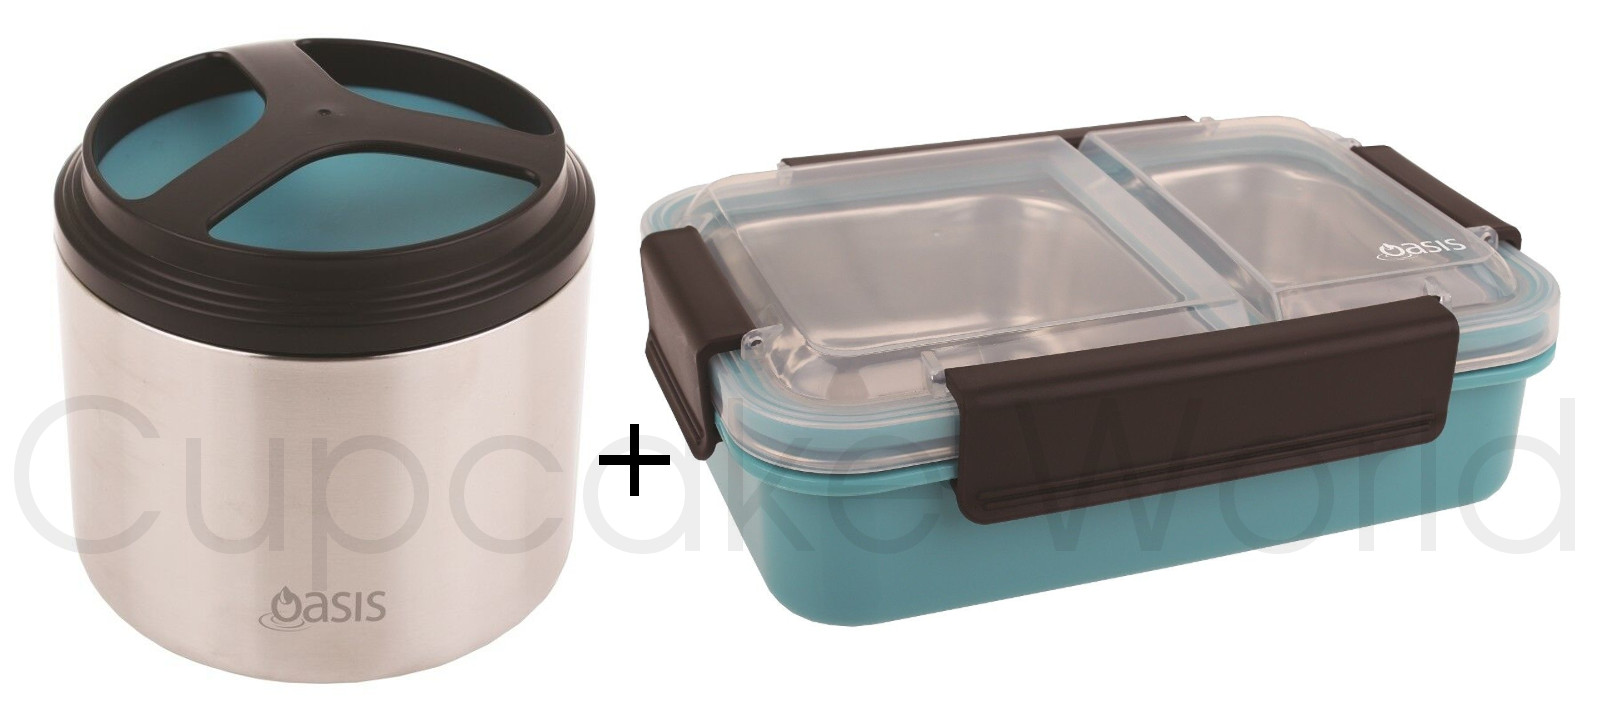 BLUE OASIS STAINLESS STEEL 1L VACUUM FOOD CONTAINER & LUNCH BOX! - Click Image to Close